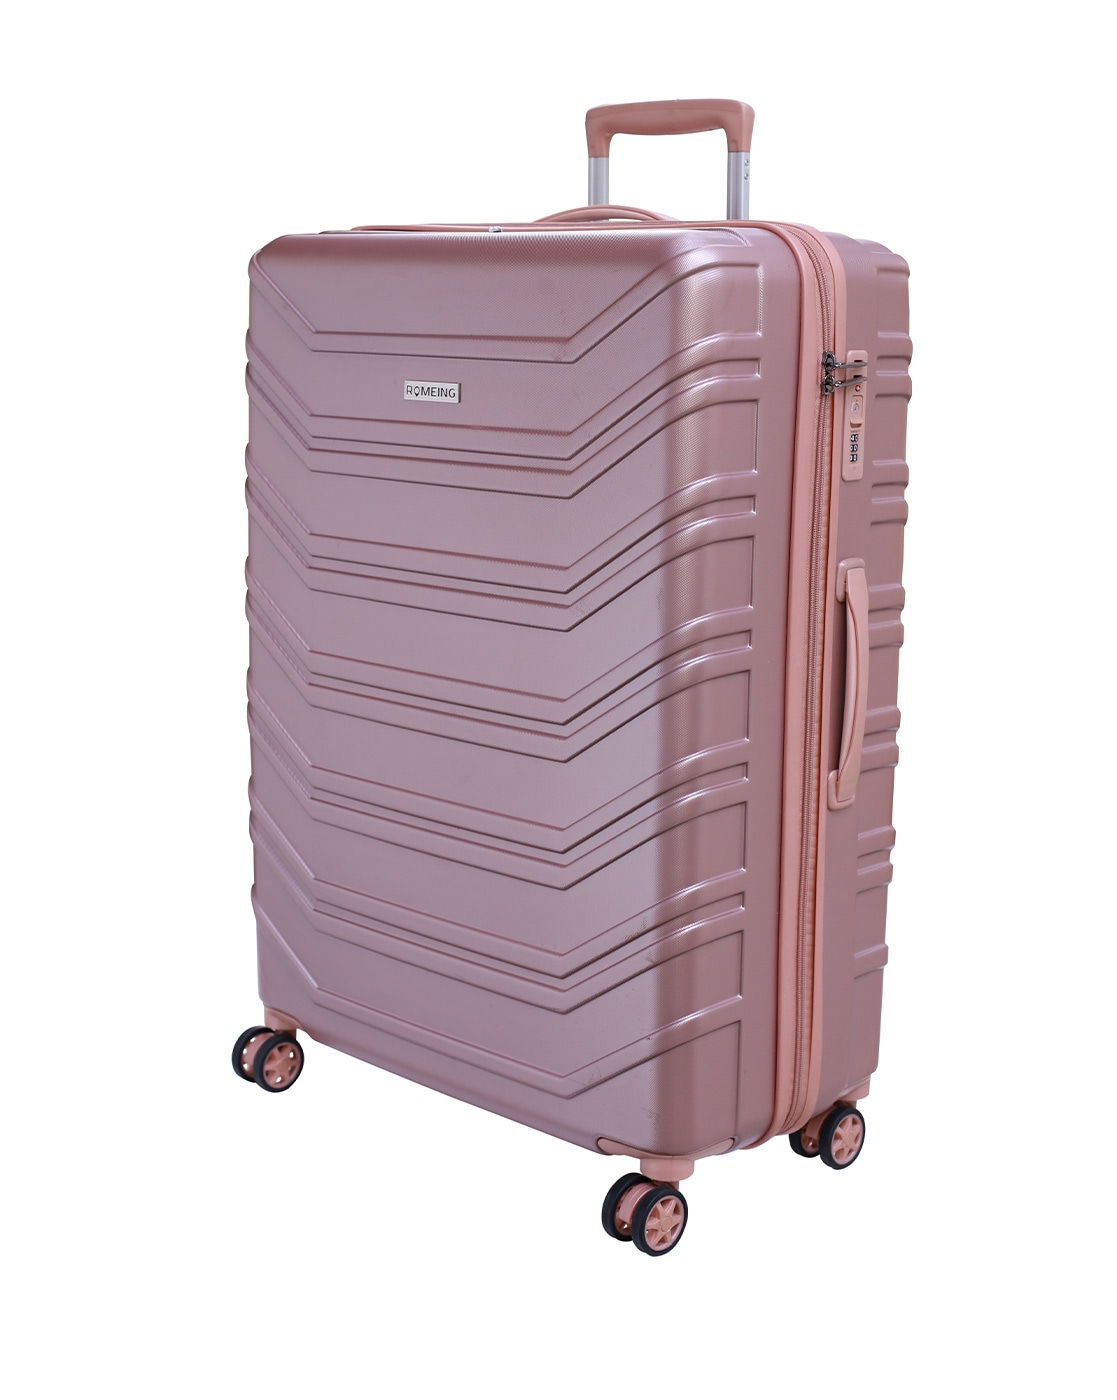 ROMEING VENICE Polycarbonate Set of 3 (55,65 & 75 cm) Rose Gold Hard Luggage  Trolley Bag Cabin & Check-in Set 4 Wheels - 28 inch Rose Gold - Price in  India | Flipkart.com